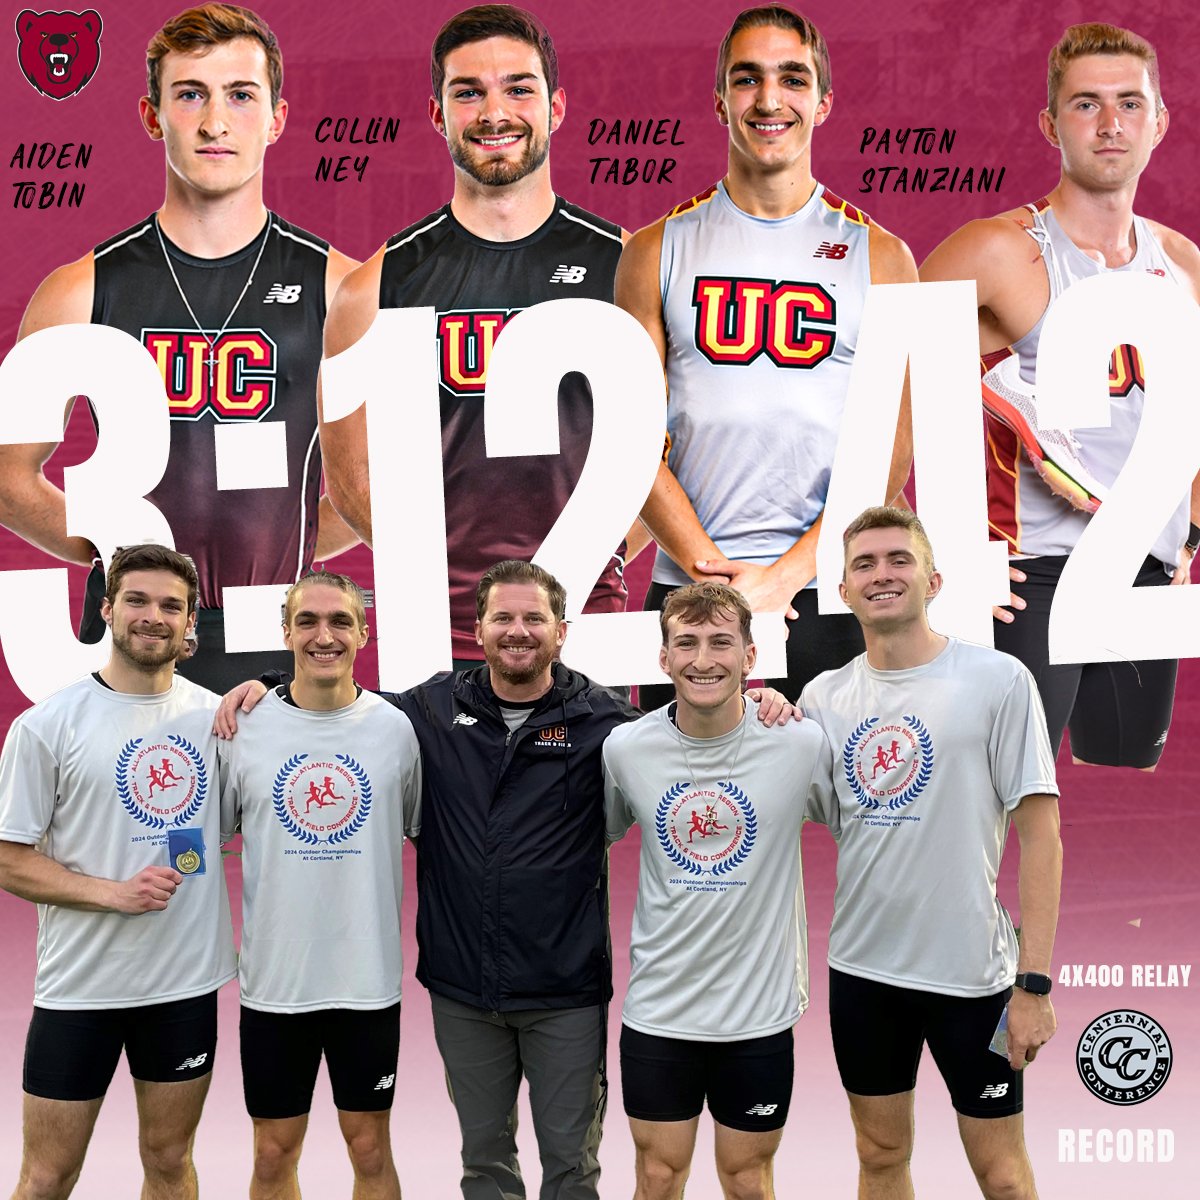 Déjà vu! The @UCTFXC 4x4 men's squad shatters their own Centennial Conference and School record at the AARTFC Regional Meet for the second straight season! #UpTheBears